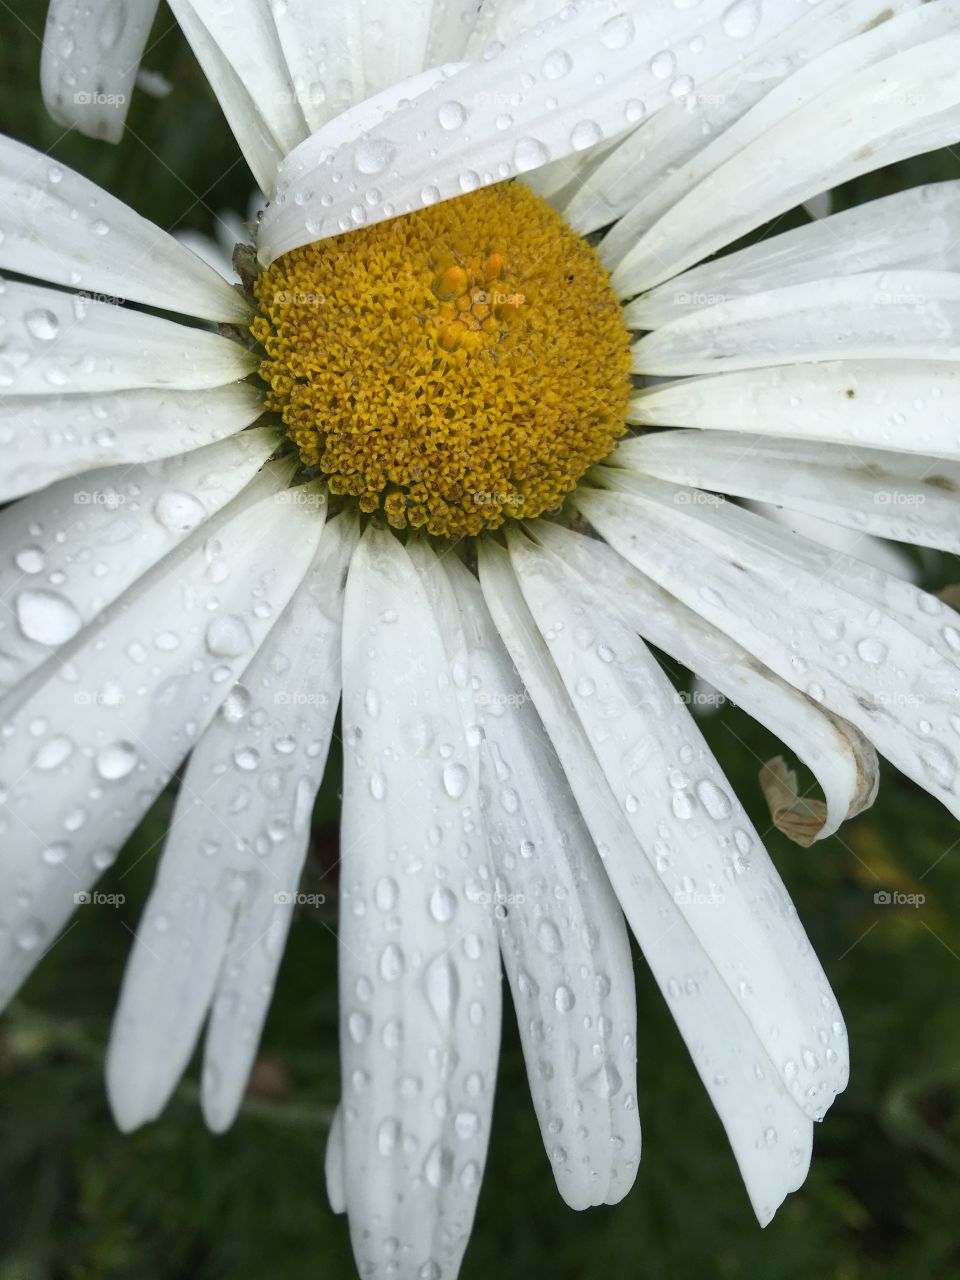 Elevated view of daisy flower